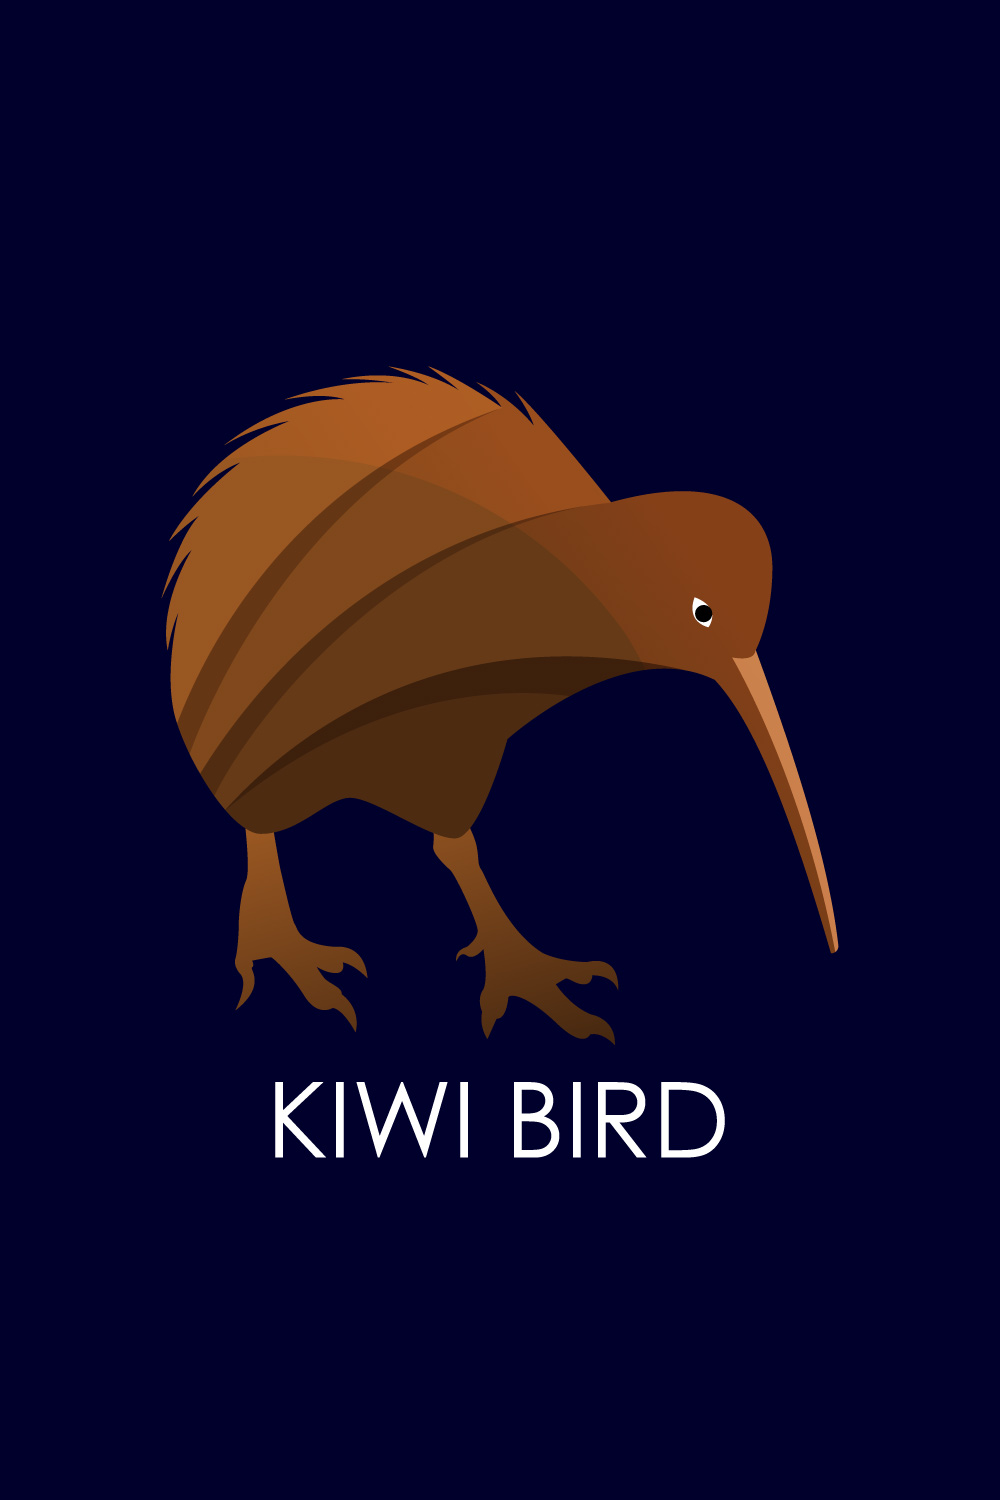 Kiwi Logo Photos, Images and Pictures